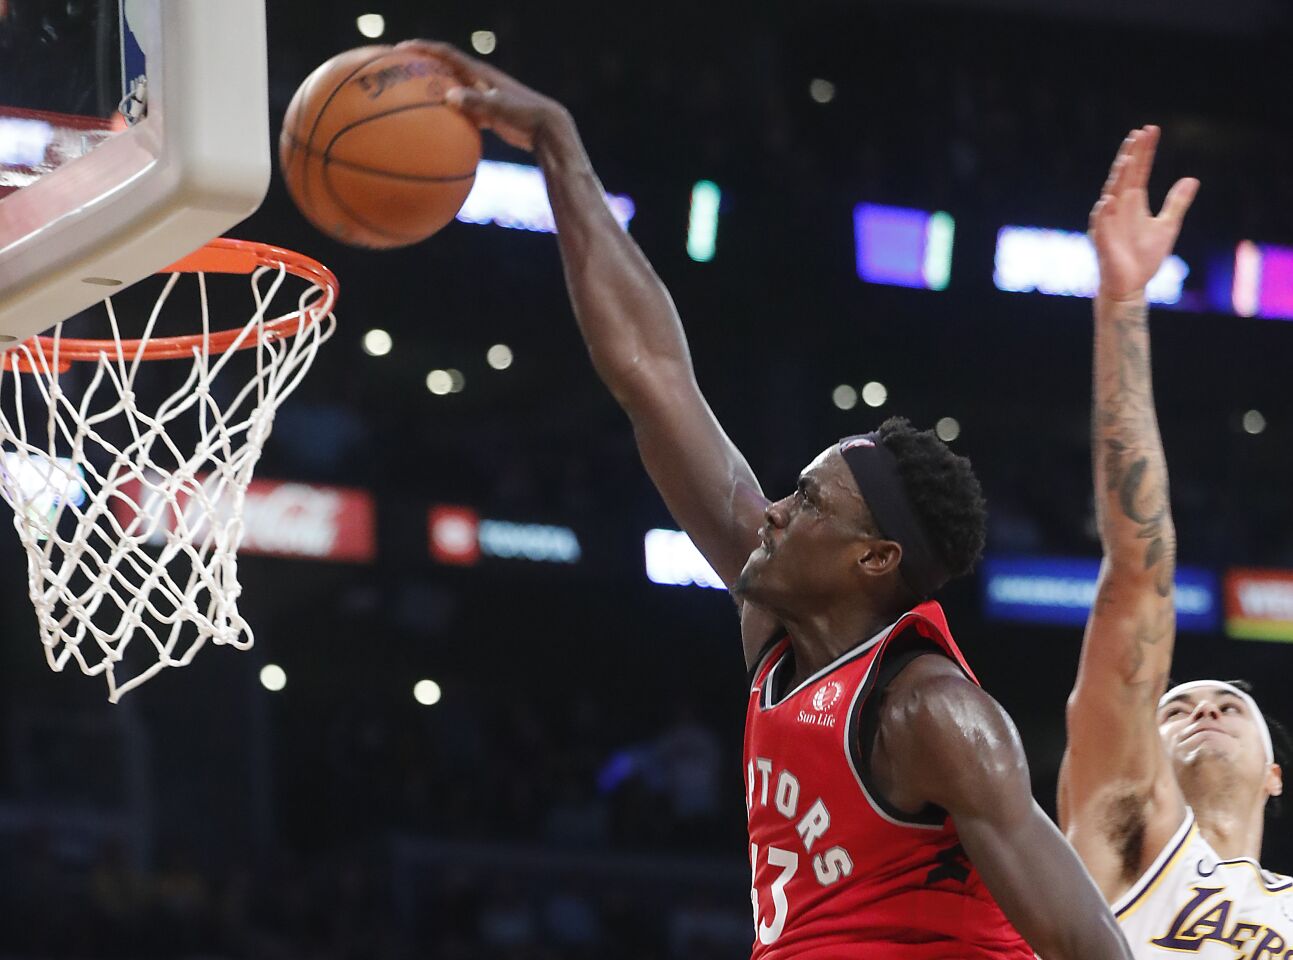 Raptors forward Pascal Siakam gets past Lakers forward Kyle Kuzma for a dunk during the fourth quarter.